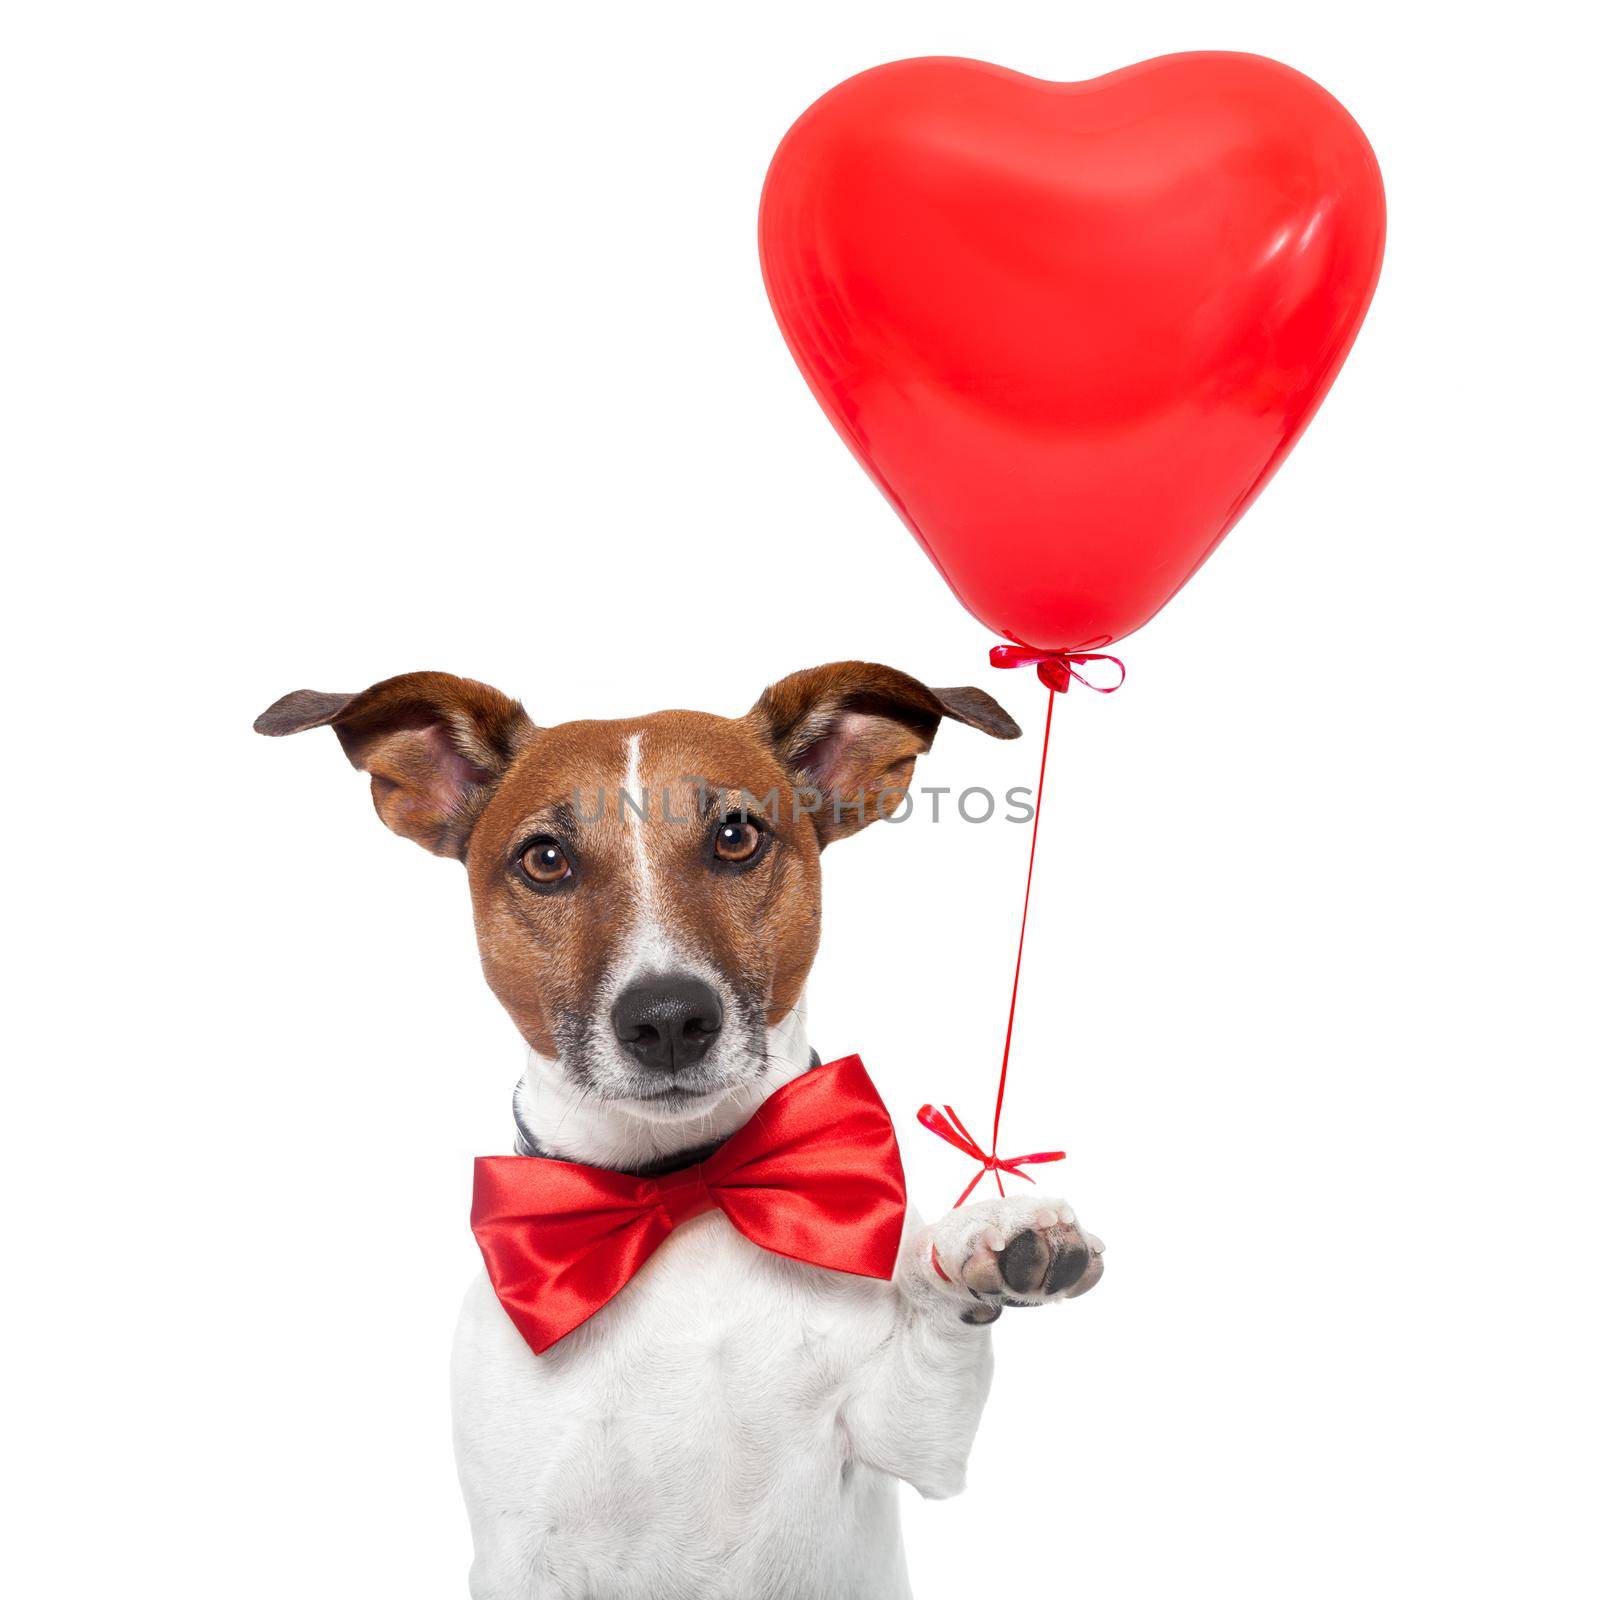 dog in love with a red heart  balloon